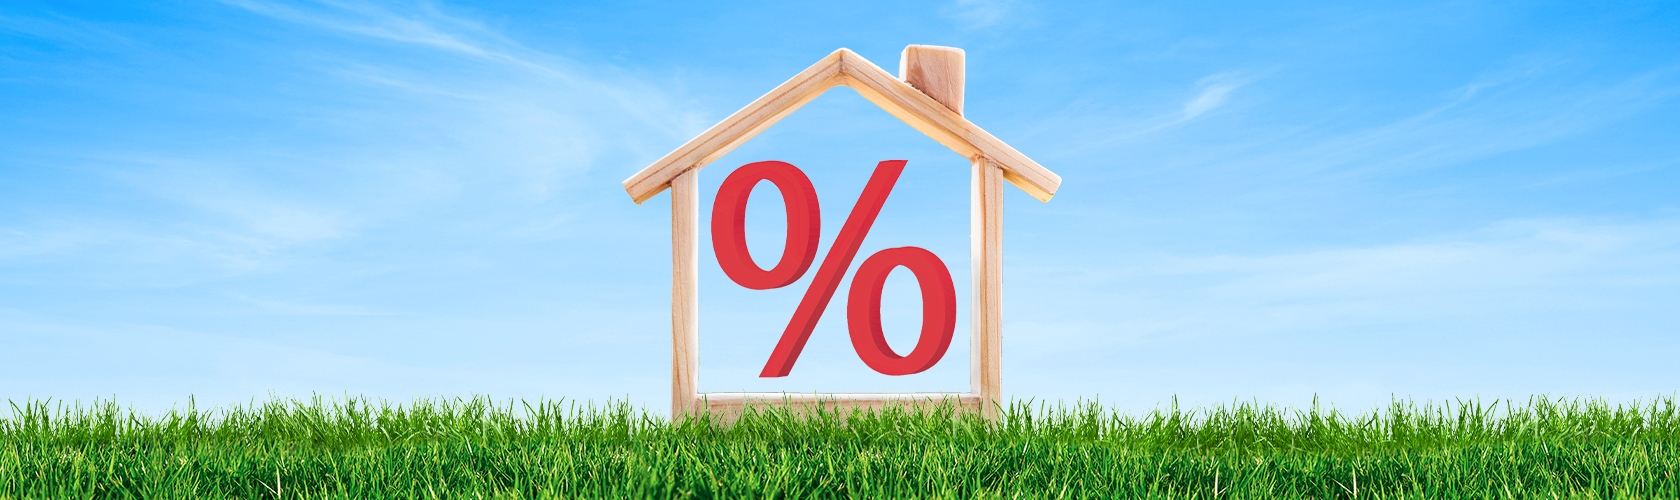 Graphic showing a percentage sign inside frame of a house